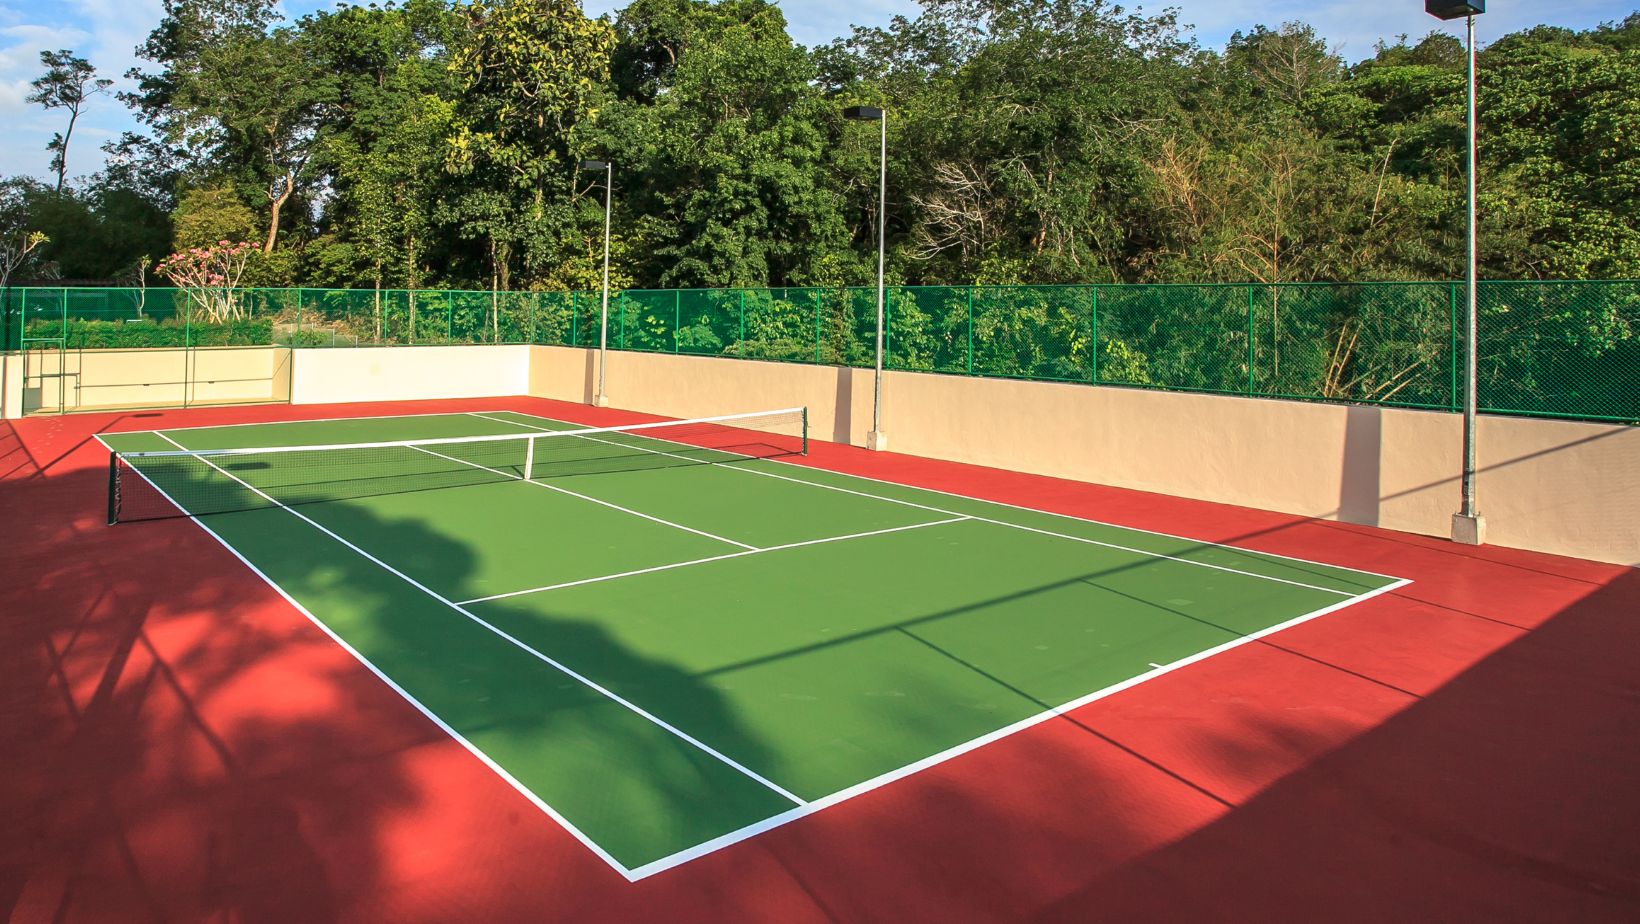 Why Should You Consider Resurfacing Your Tennis Court?